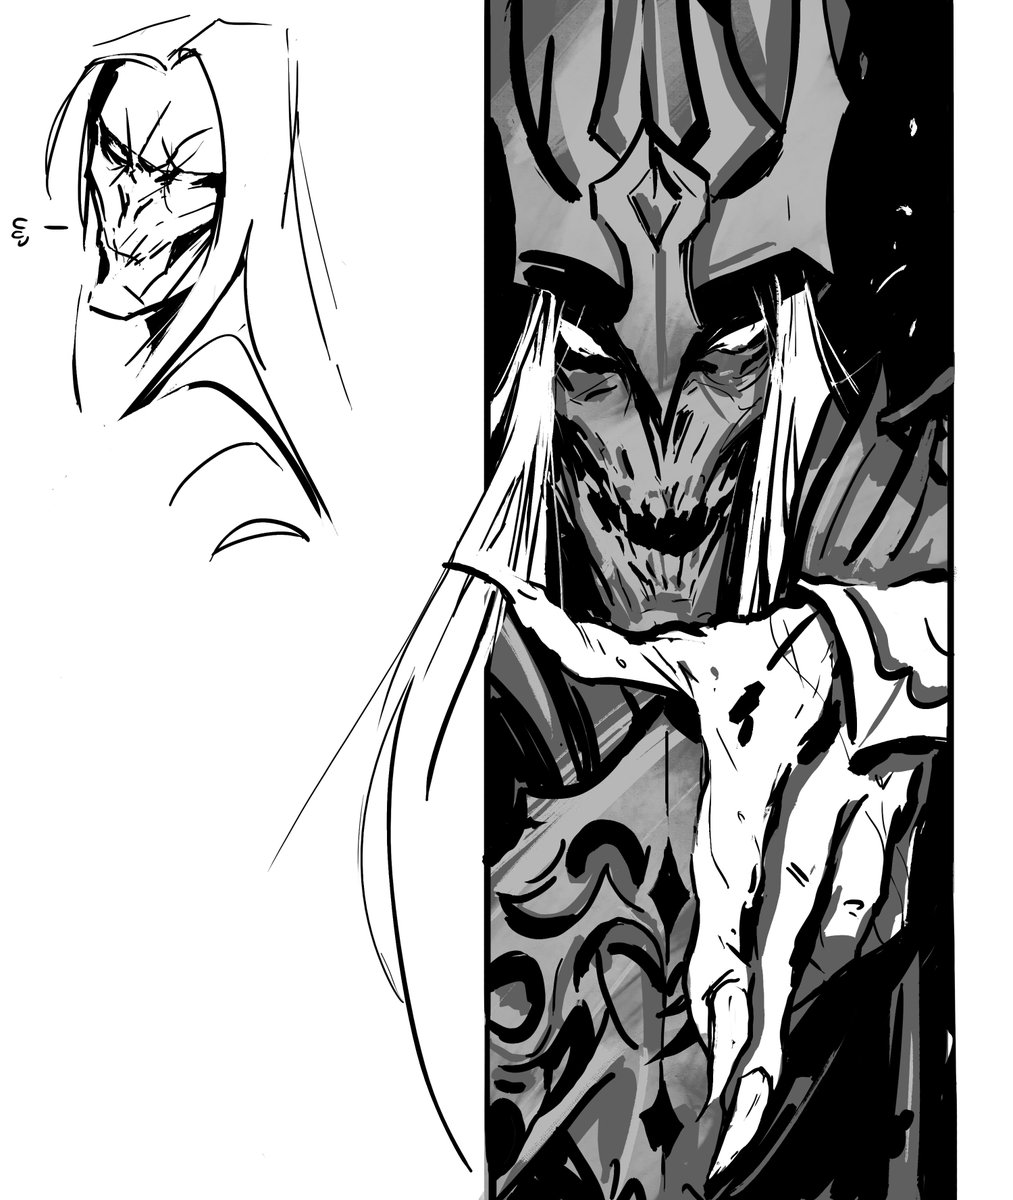 Old and new Karthus sketches bcs I (still) listen too much Ghost. 